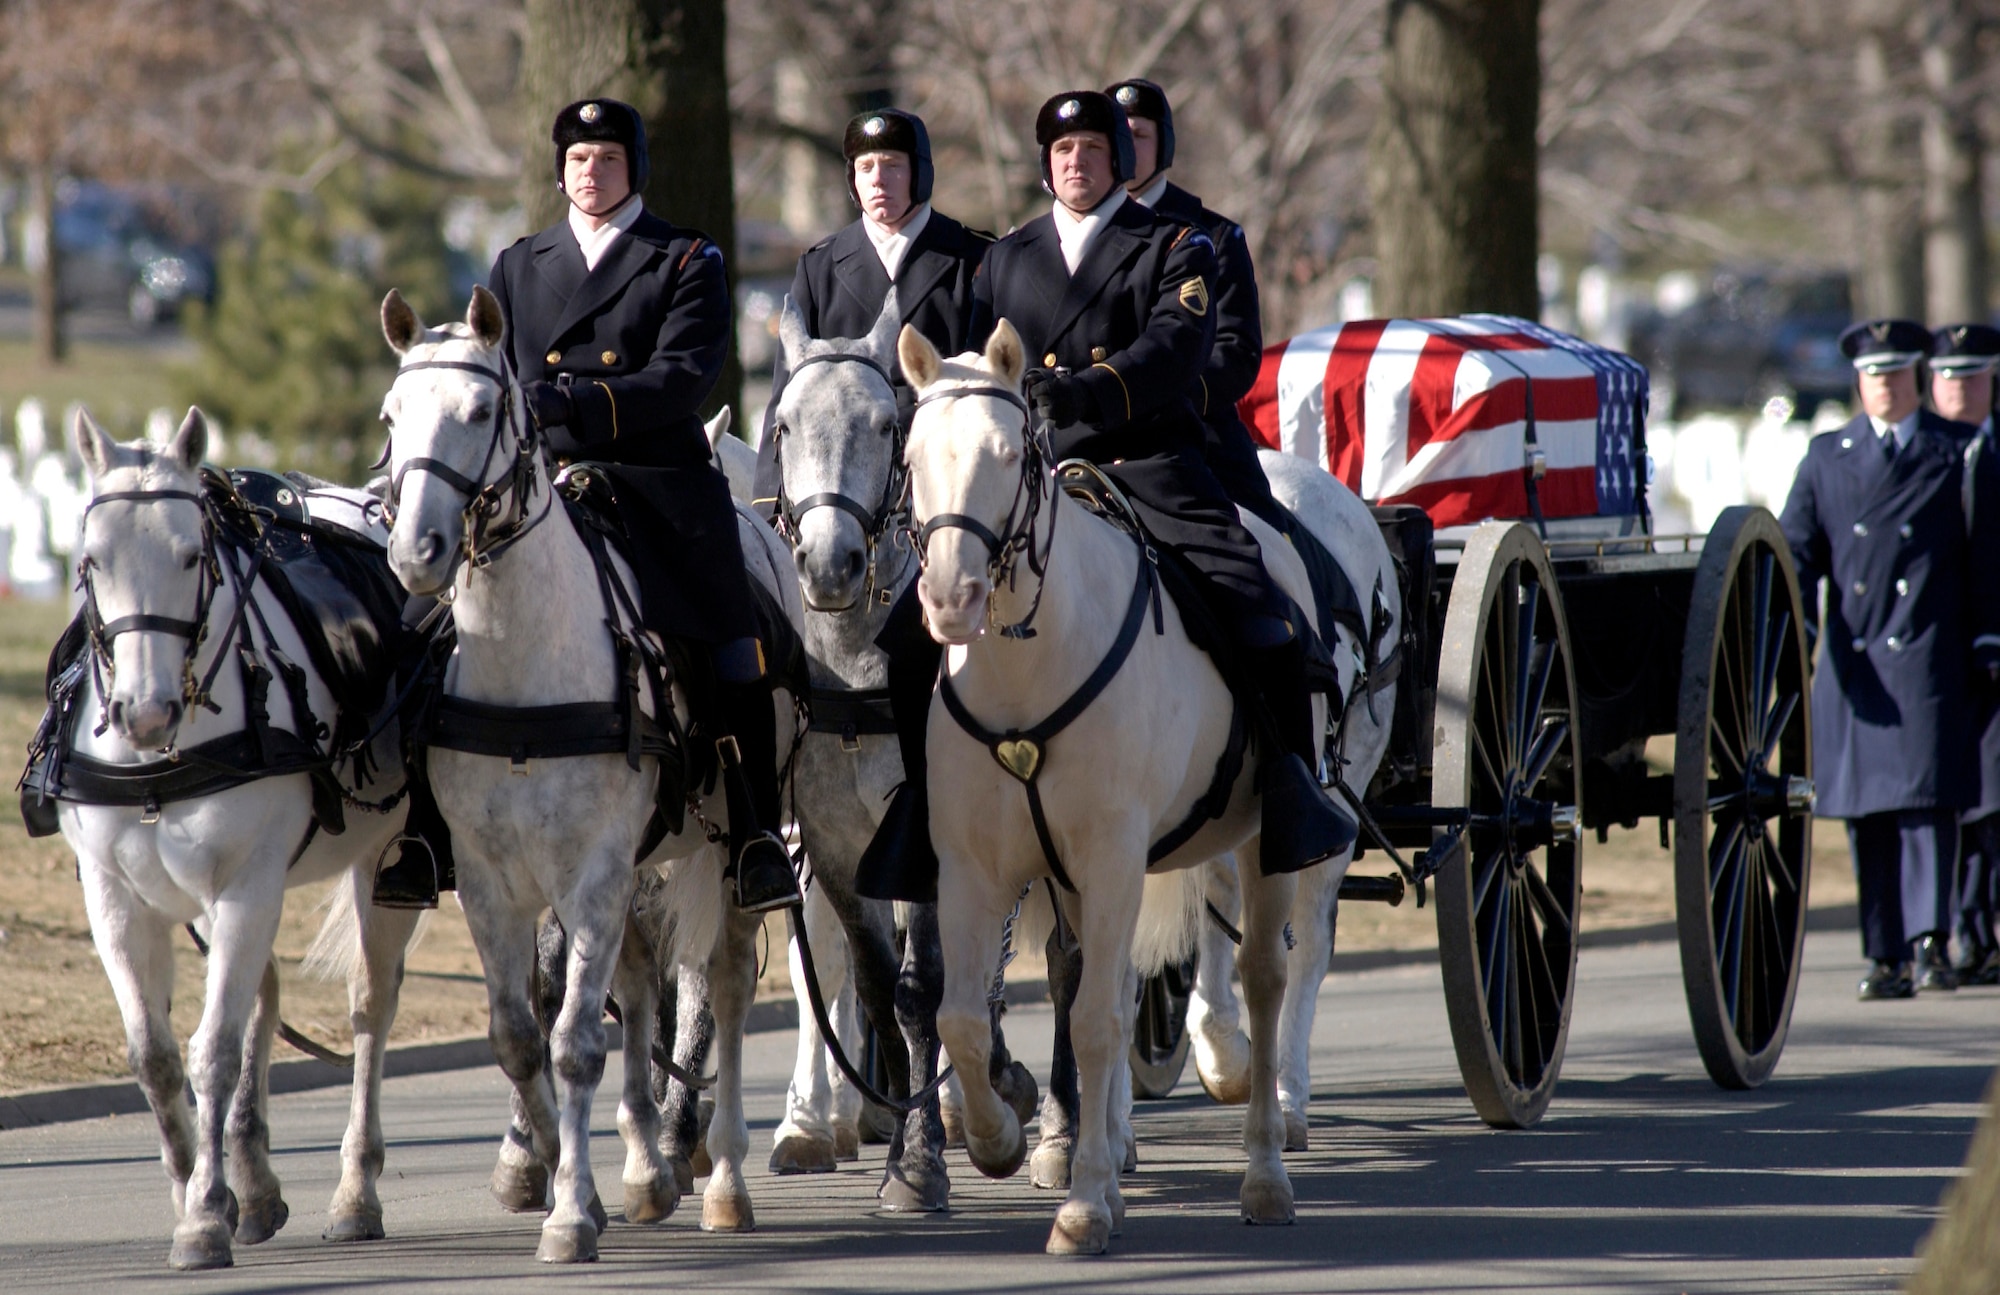 ARLINGTON, Va. -- Five military members who were killed when their MH-53M Pave Low helicopter crashed Nov. 23 in Afghanistan are carried to their final resting place by horse-drawn caisson during a full-honor mass funeral at Arlington National Cemetery on Jan. 21.  (U.S. Air Force photo by Master Sgt.  Jim Varhegyi)